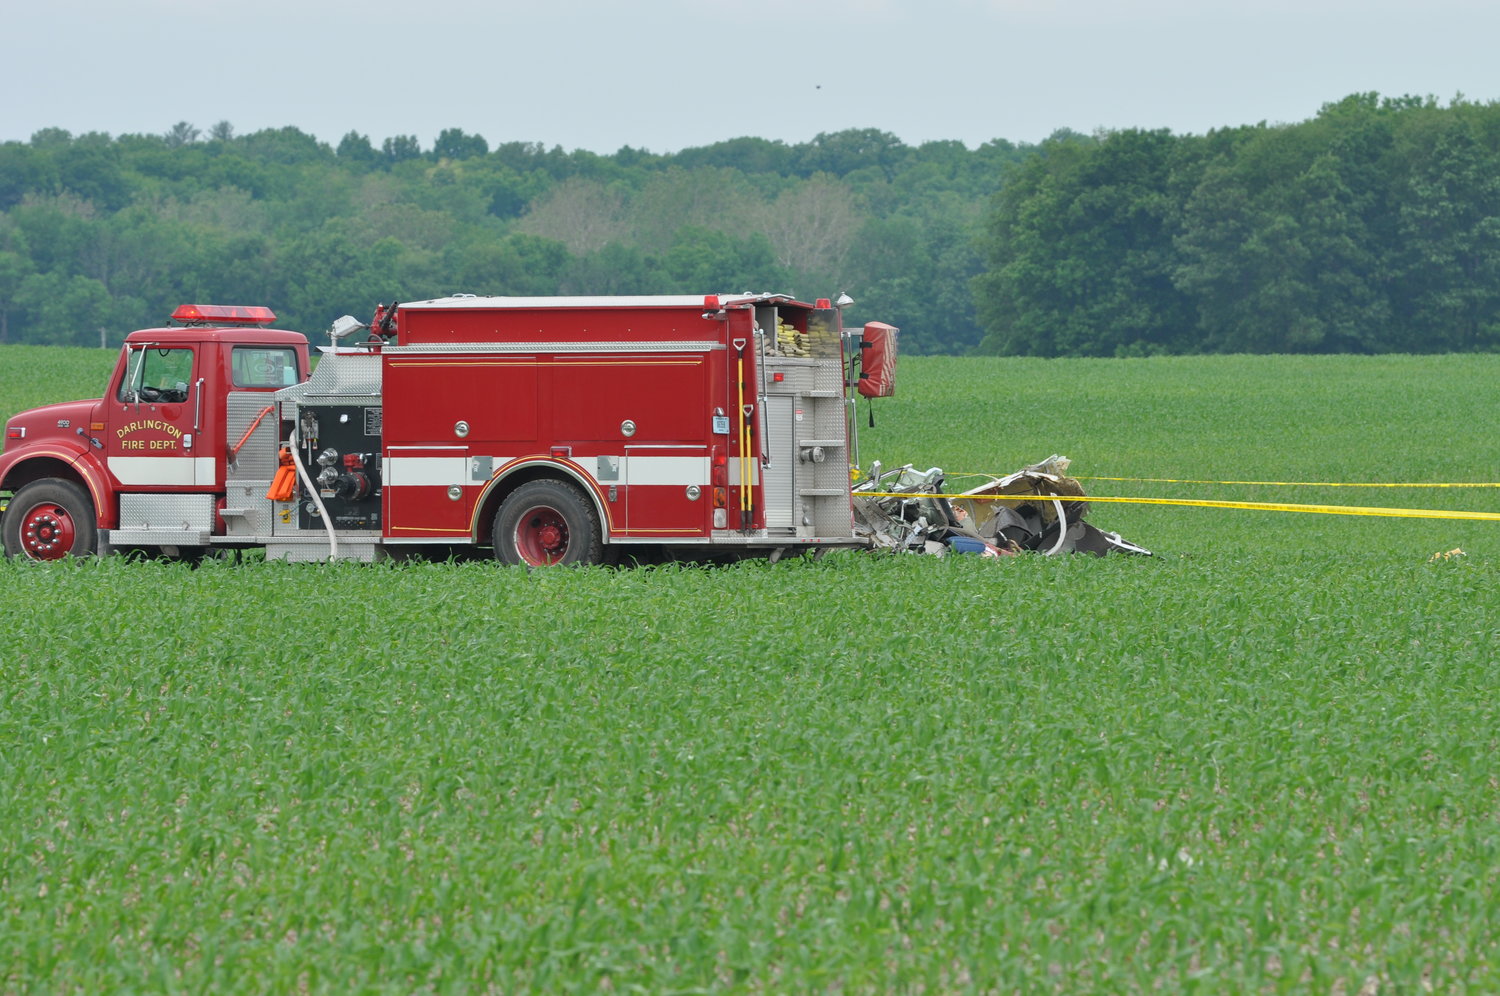 A single-engine plane crashed Sunday in a field near the intersection of State Road 47N and C.R. 800E, just outside of Darlington. The crash claimed the lives of the two people on board.